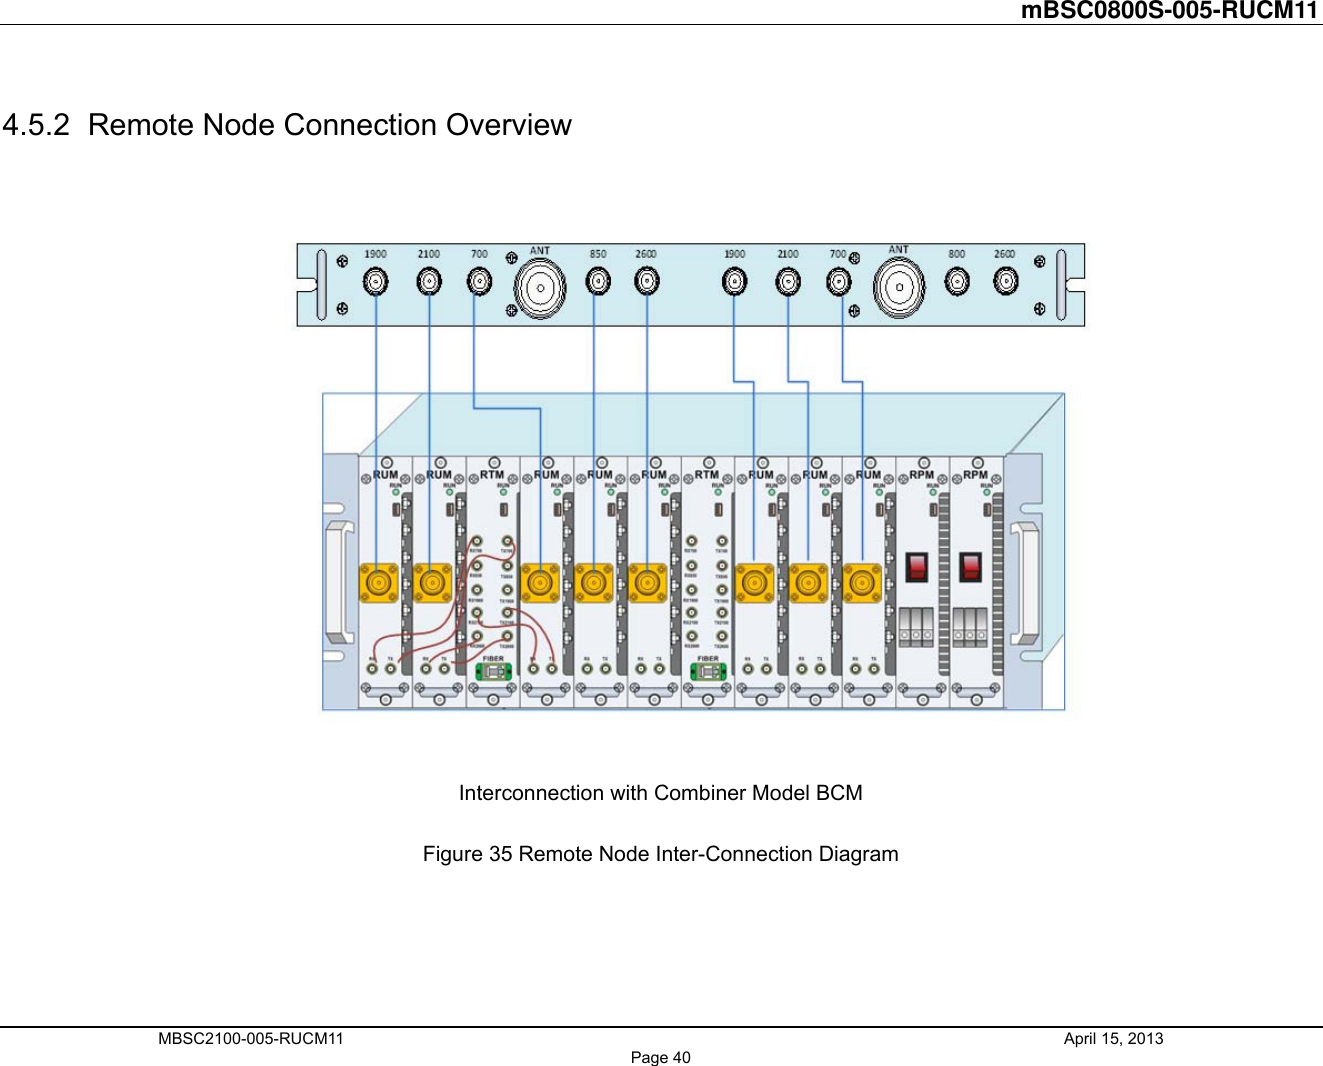          mBSC0800S-005-RUCM11   MBSC2100-005-RUCM11                                              April 15, 2013 Page 40 4.5.2  Remote Node Connection Overview   Interconnection with Combiner Model BCM  Figure 35 Remote Node Inter-Connection Diagram  